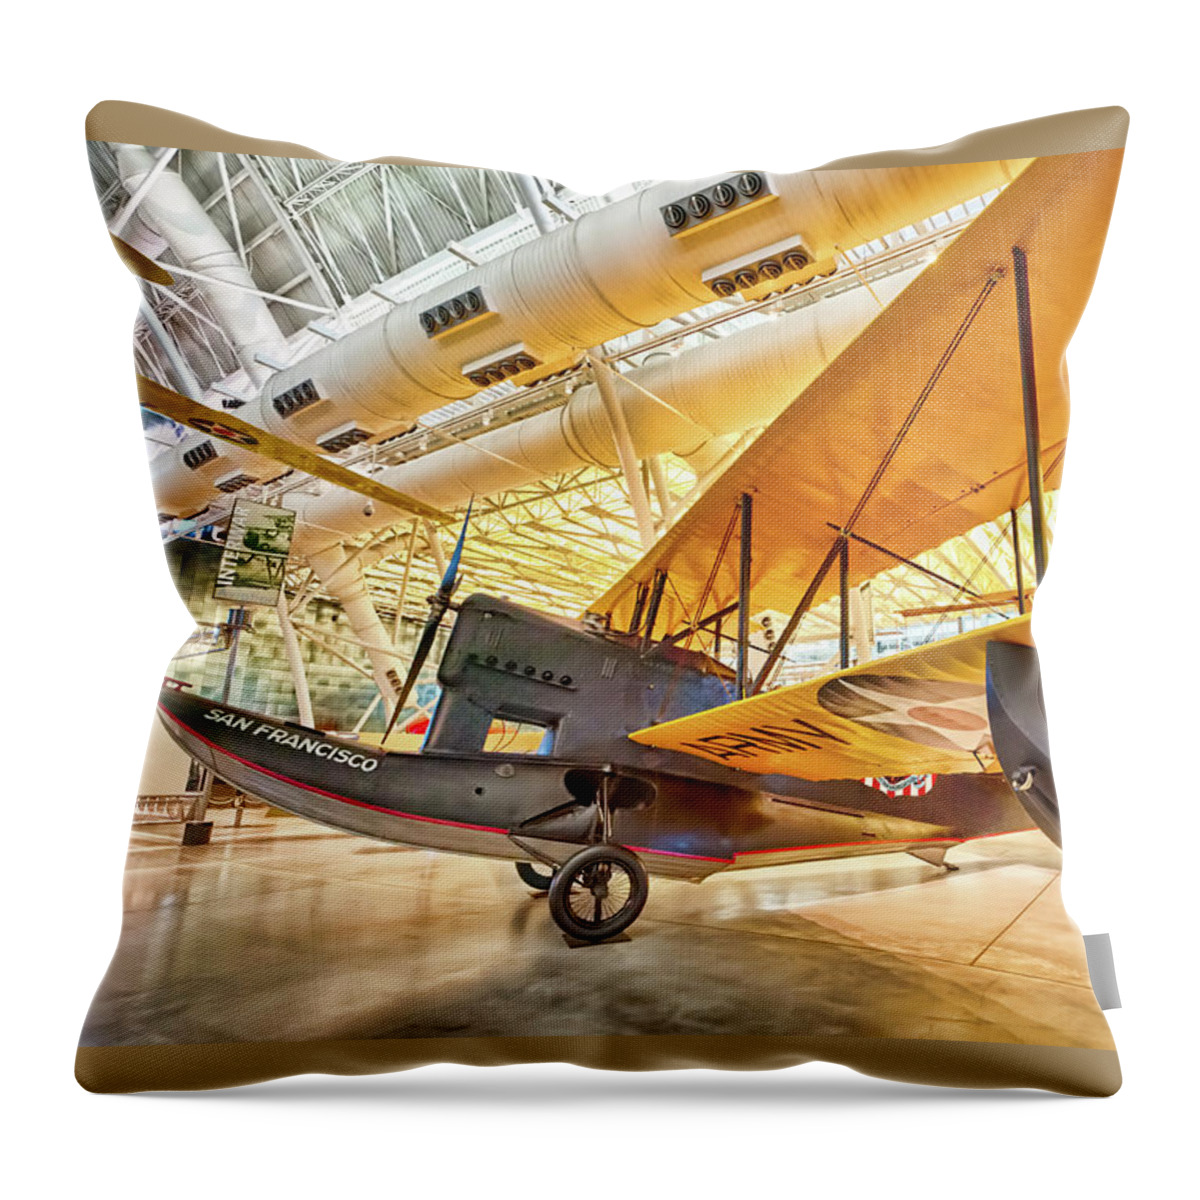 Virginia Throw Pillow featuring the photograph Old Army Biplane by Lara Ellis